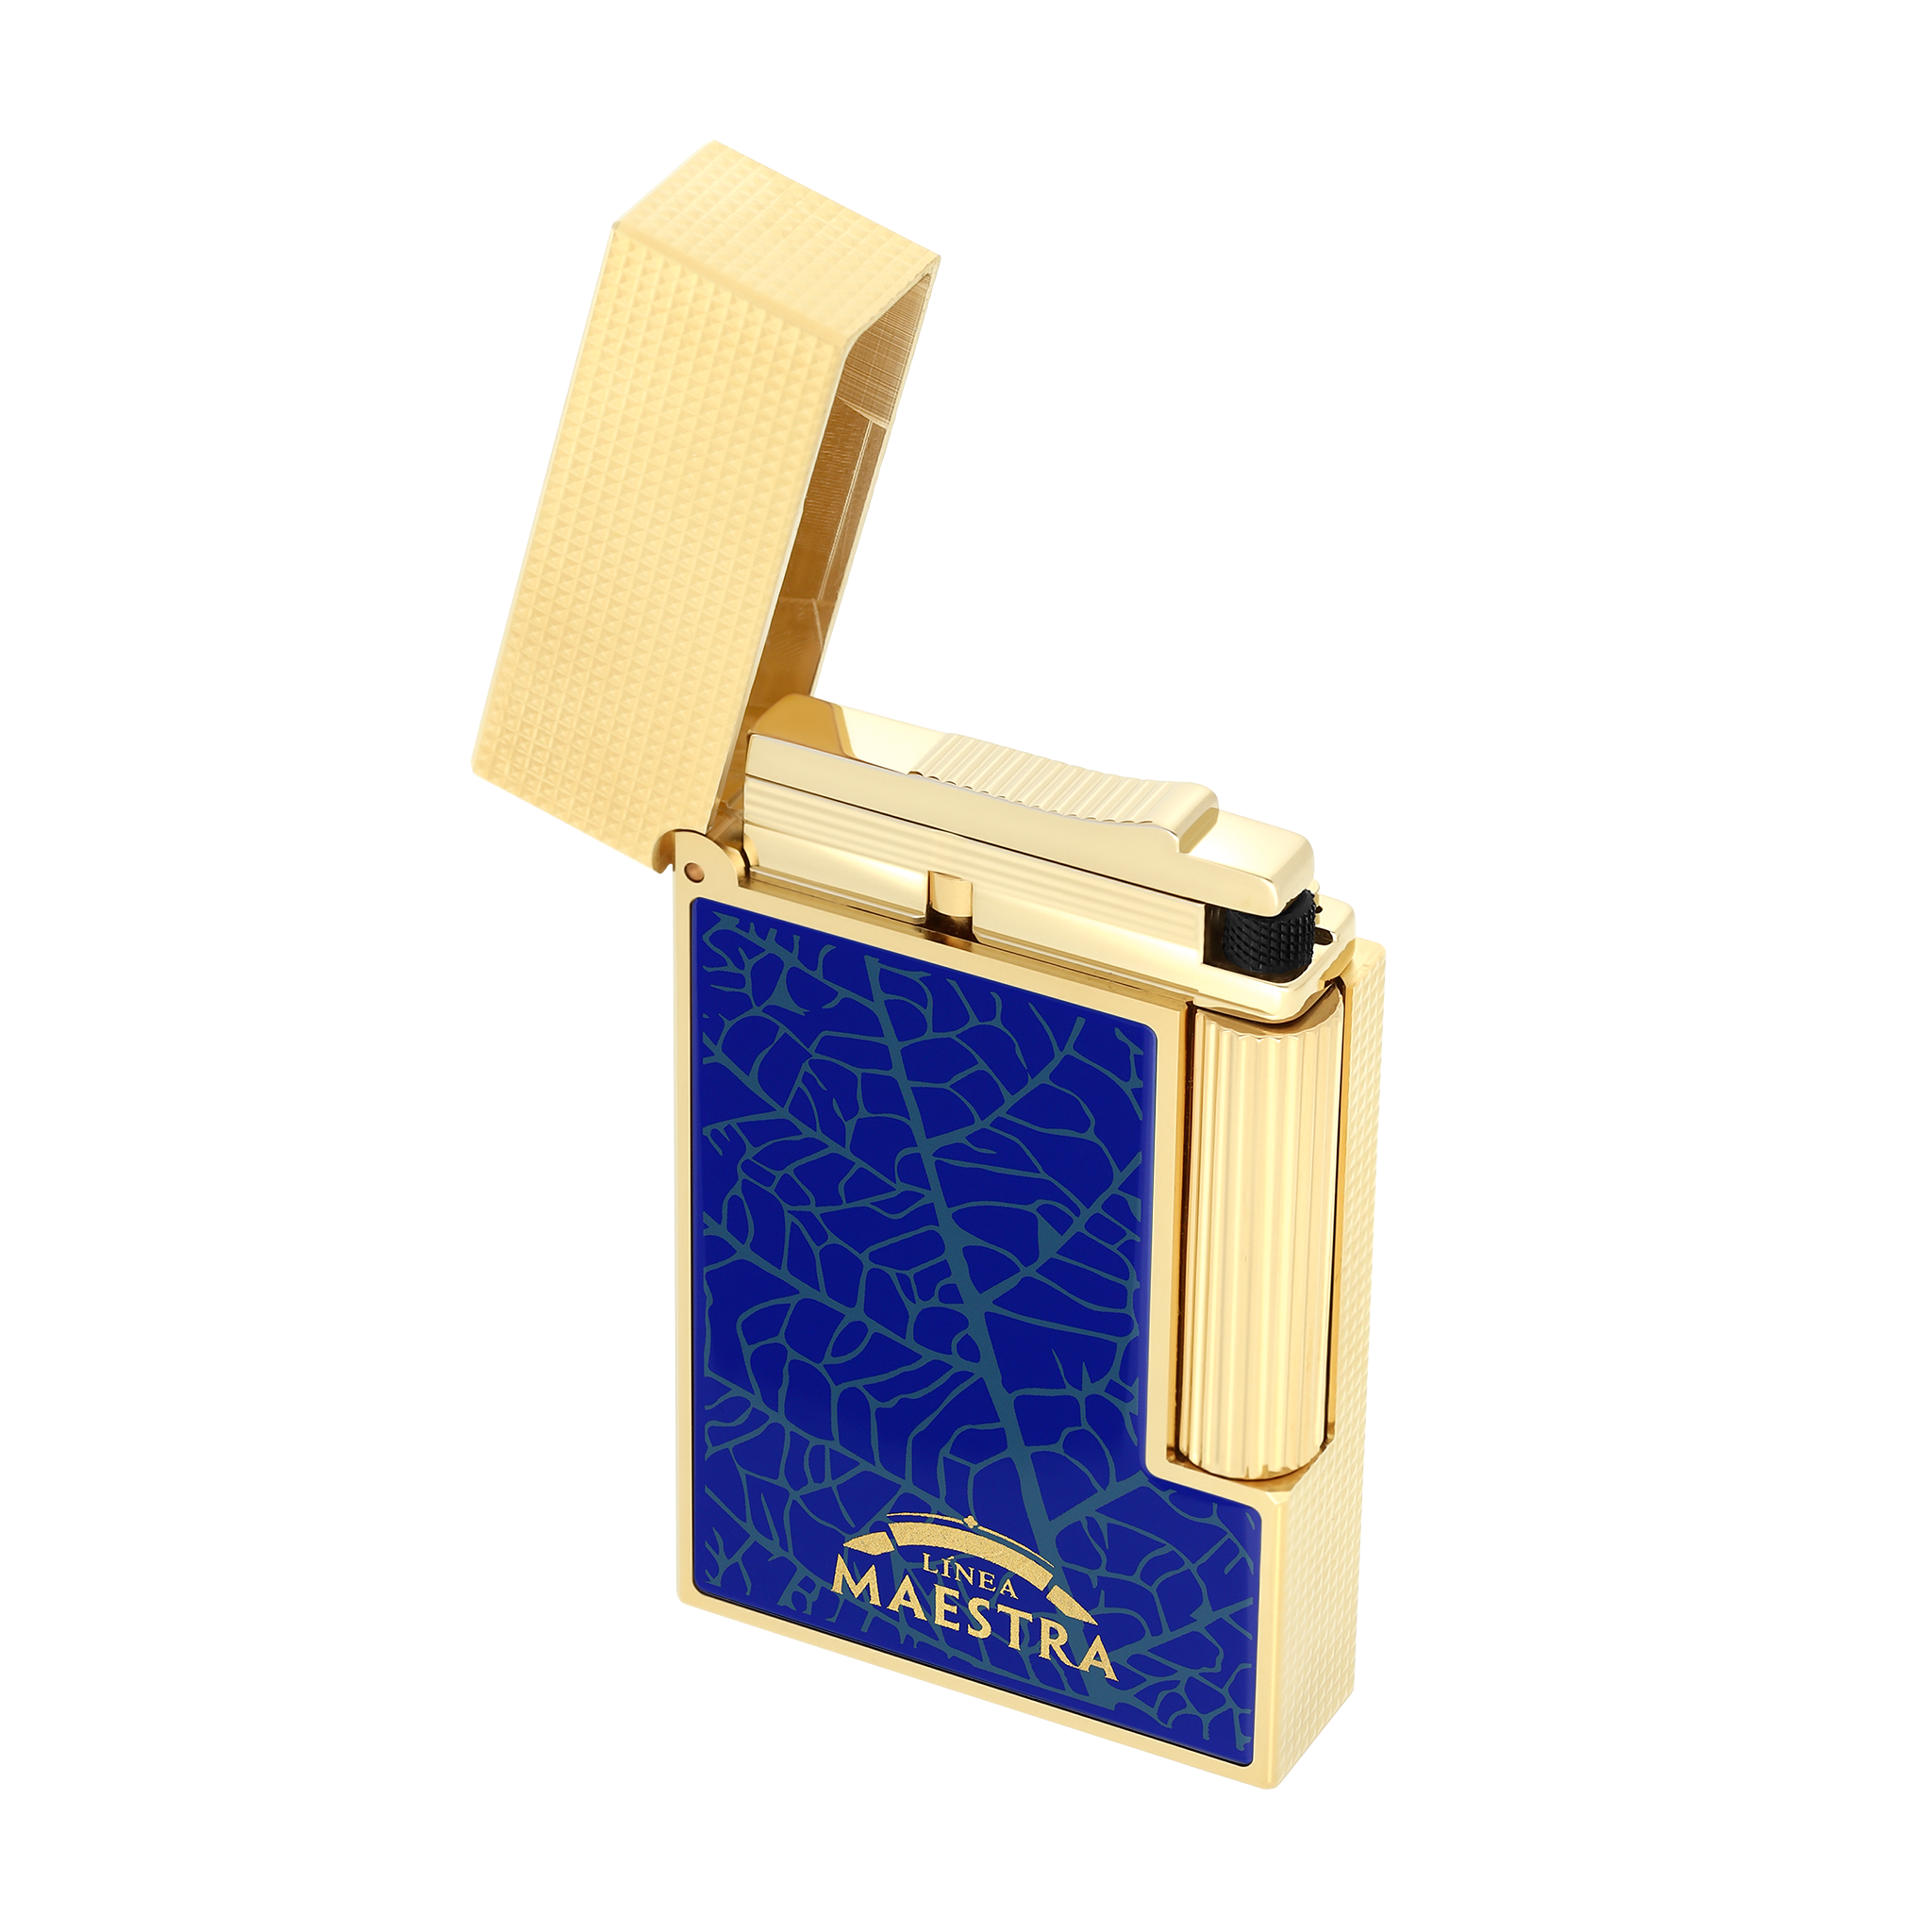 Line 2 Partagas Blue / Yellow Gold Lighter. Luxury Lighters | S.T.Dupont –